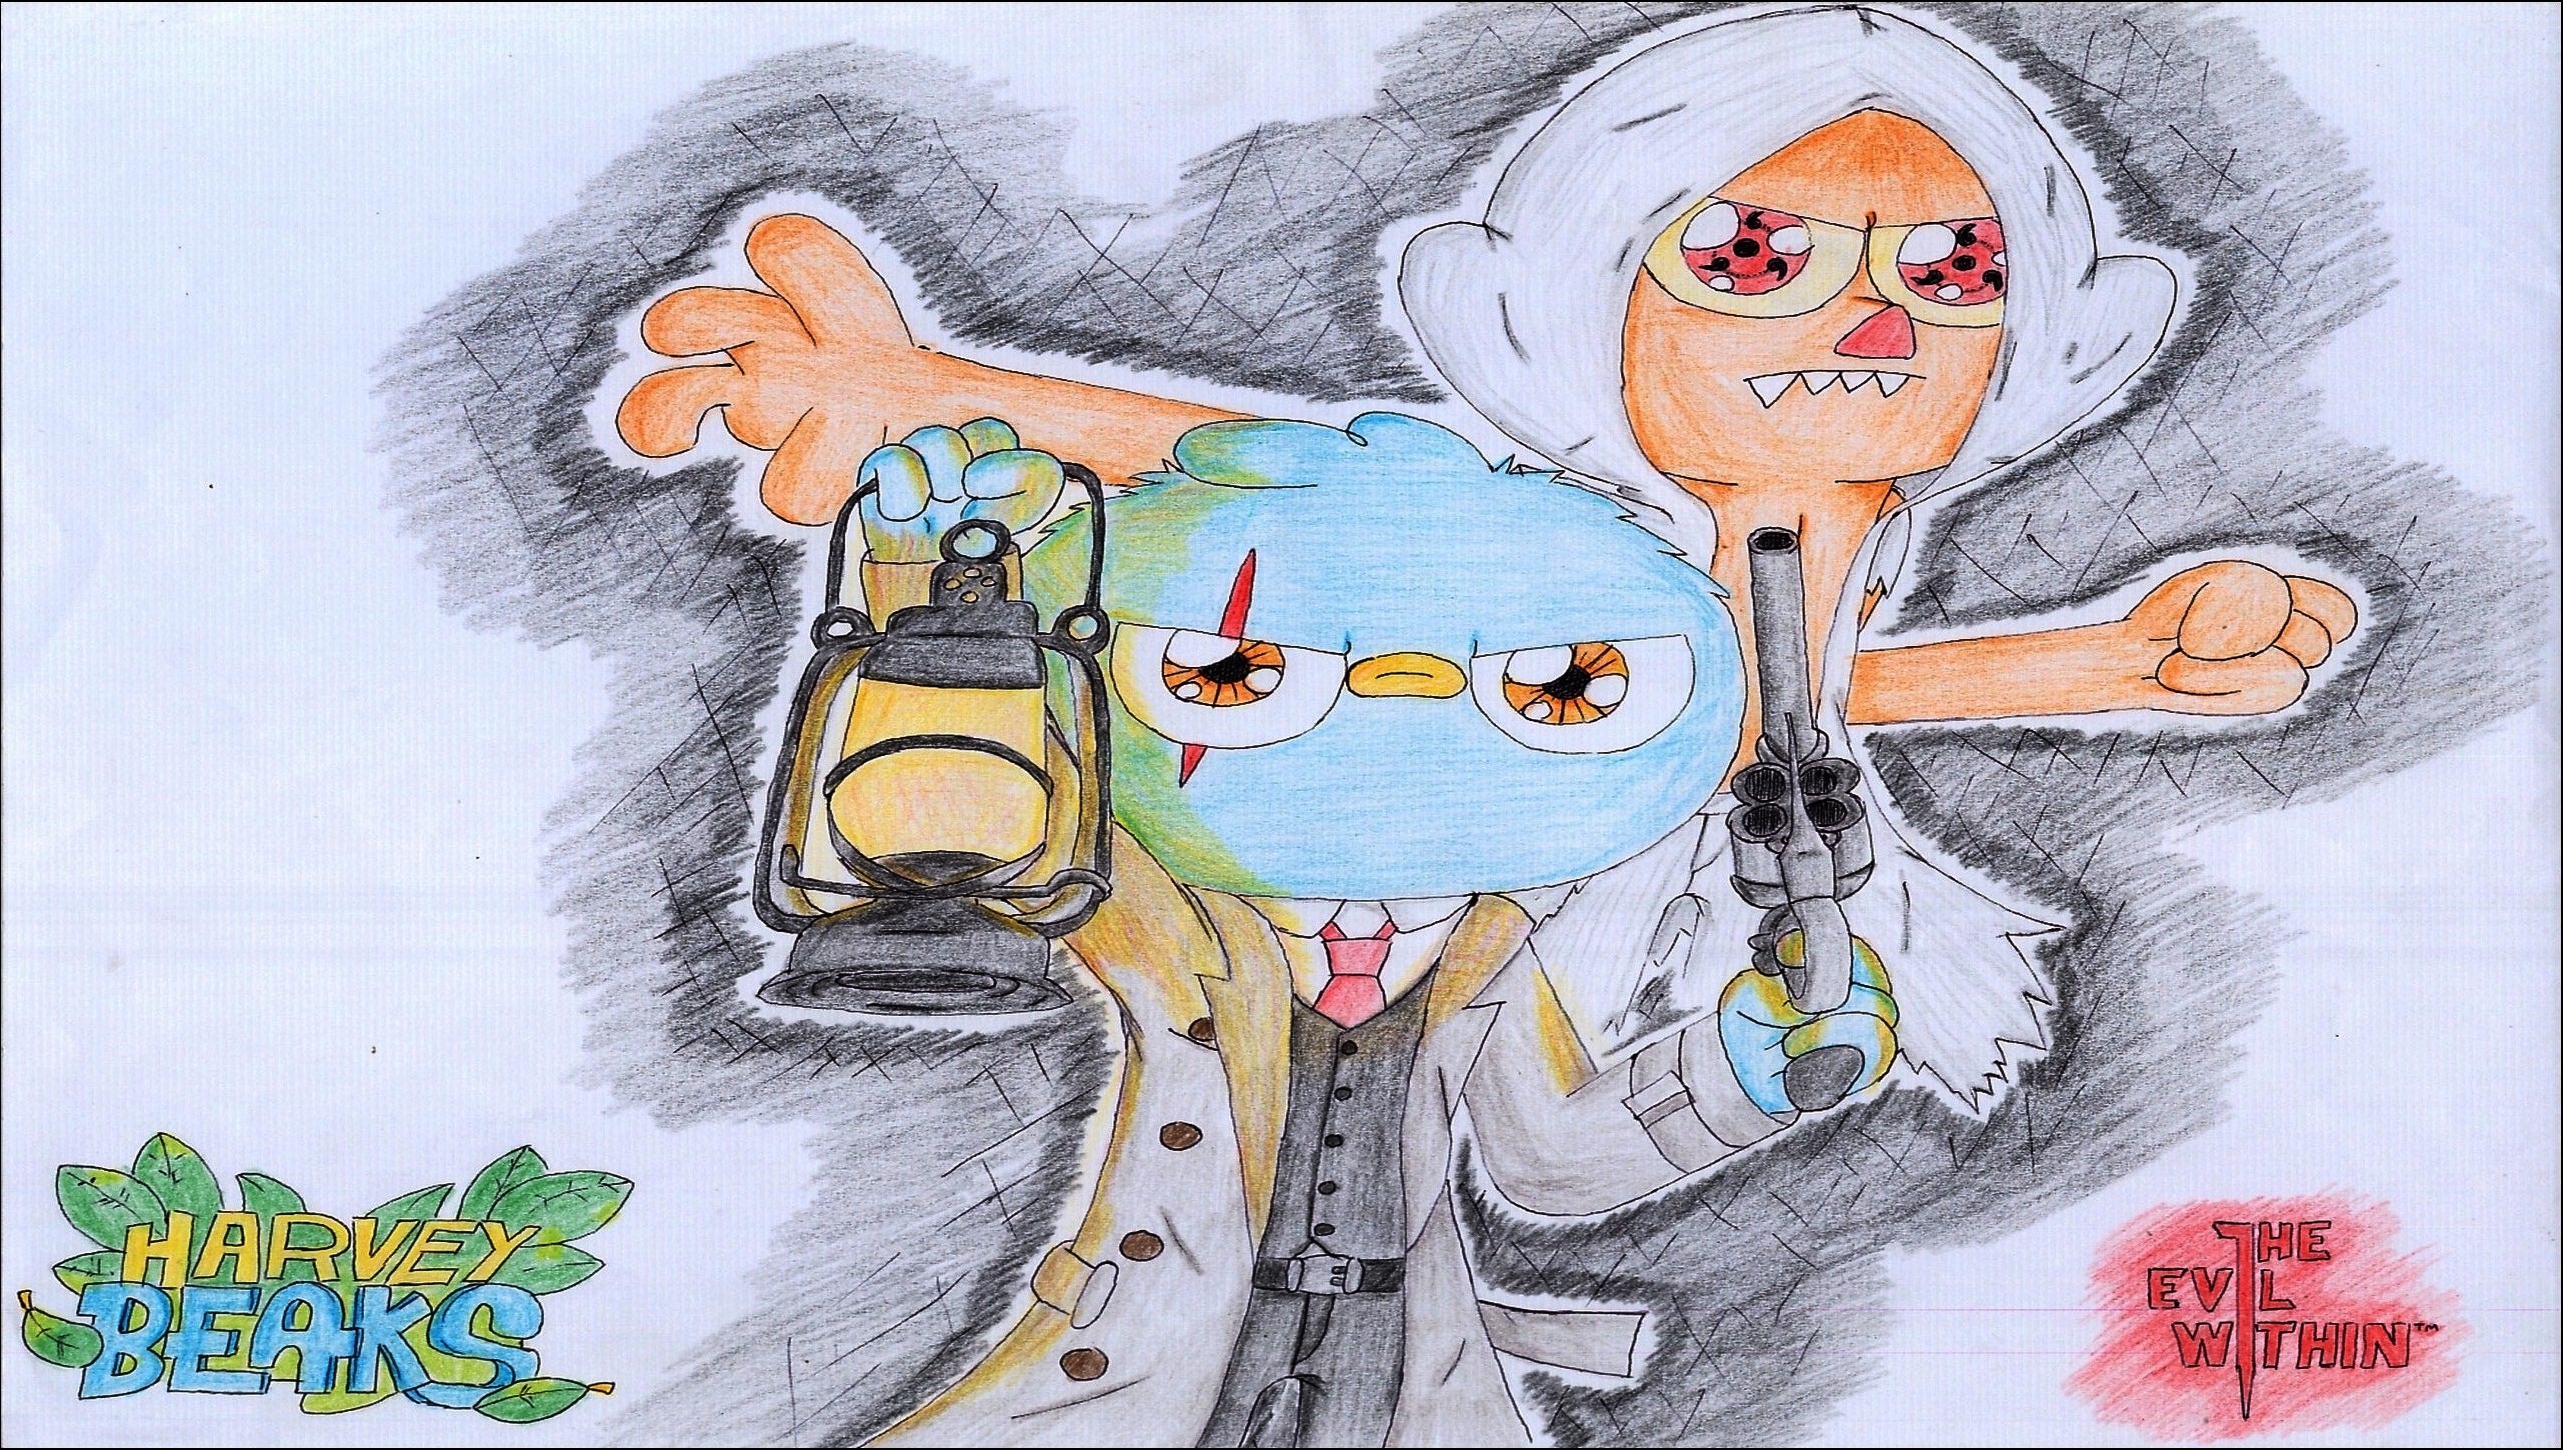 Harvey Beaks + The Evil Within = .... (Colored)